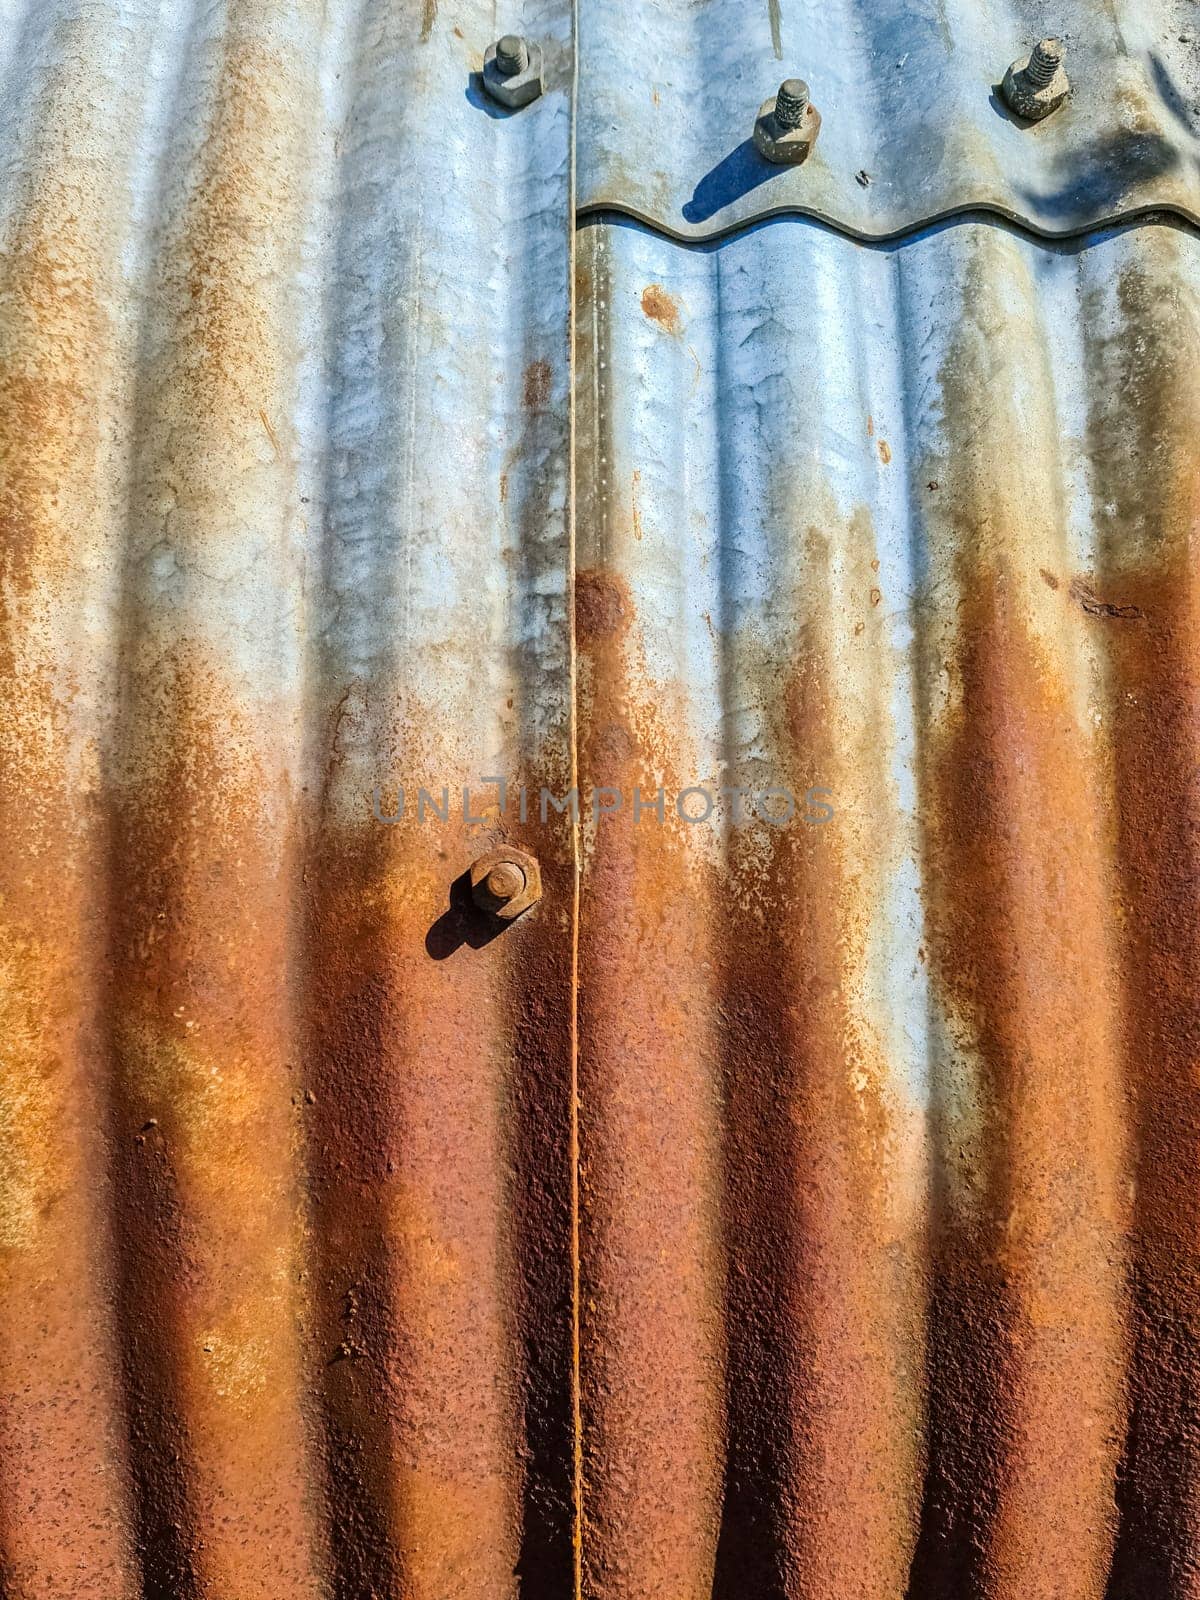 Rusty metal and steel with lots of corrosion in high resolution by MP_foto71